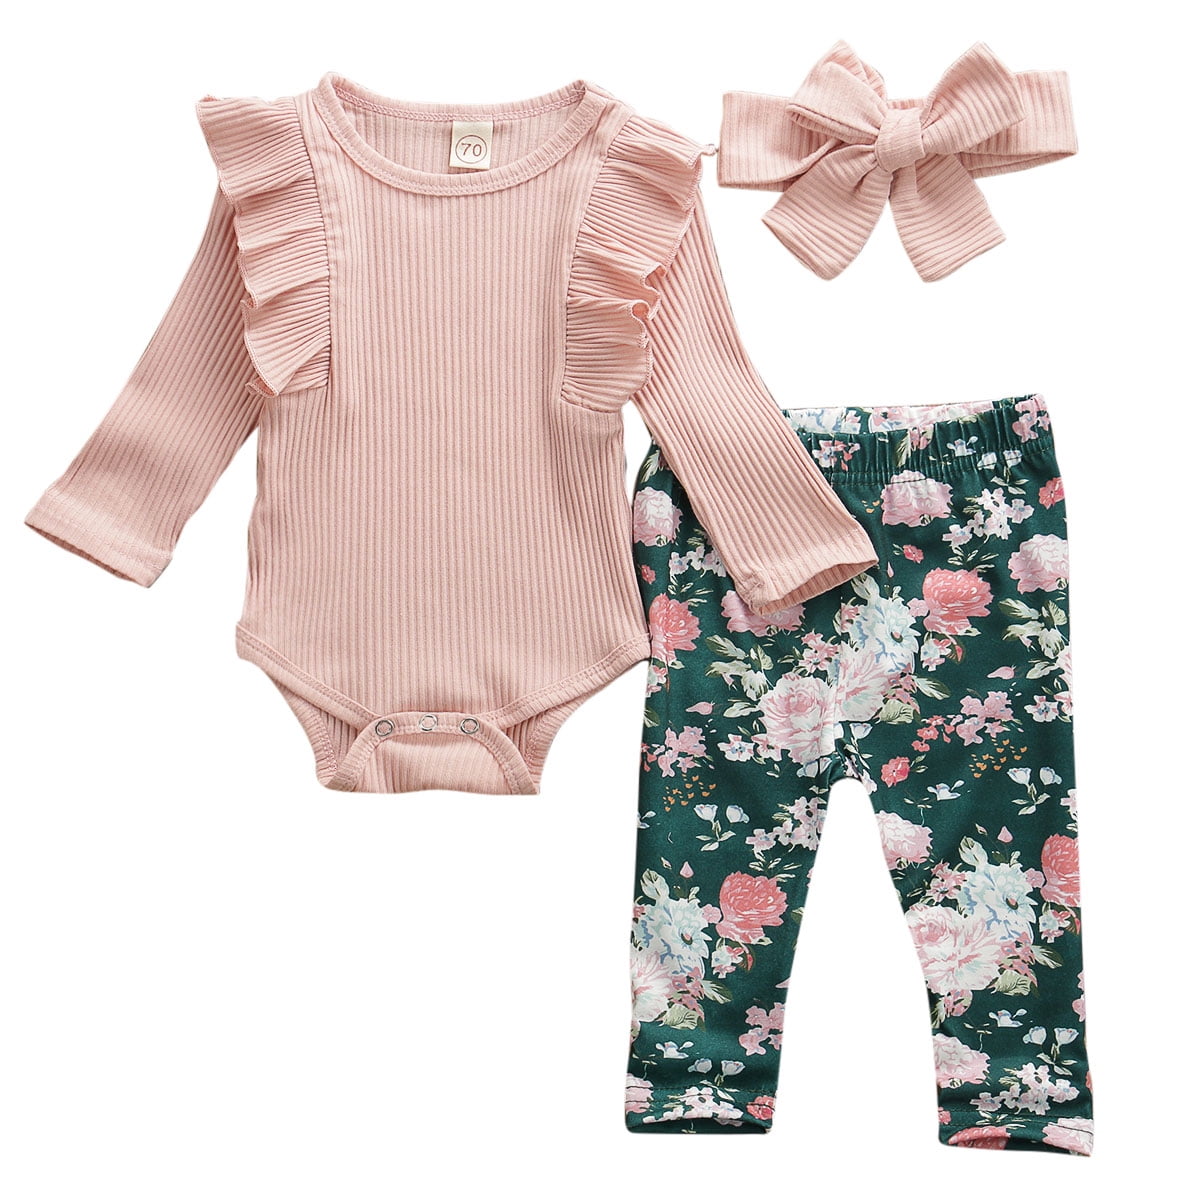 Baby Baby Girl Knitted Clothes Ruffle Long Sleeve Romper Floral Legging Pants Autumn Outfits Set 0-24M - Walmart.com